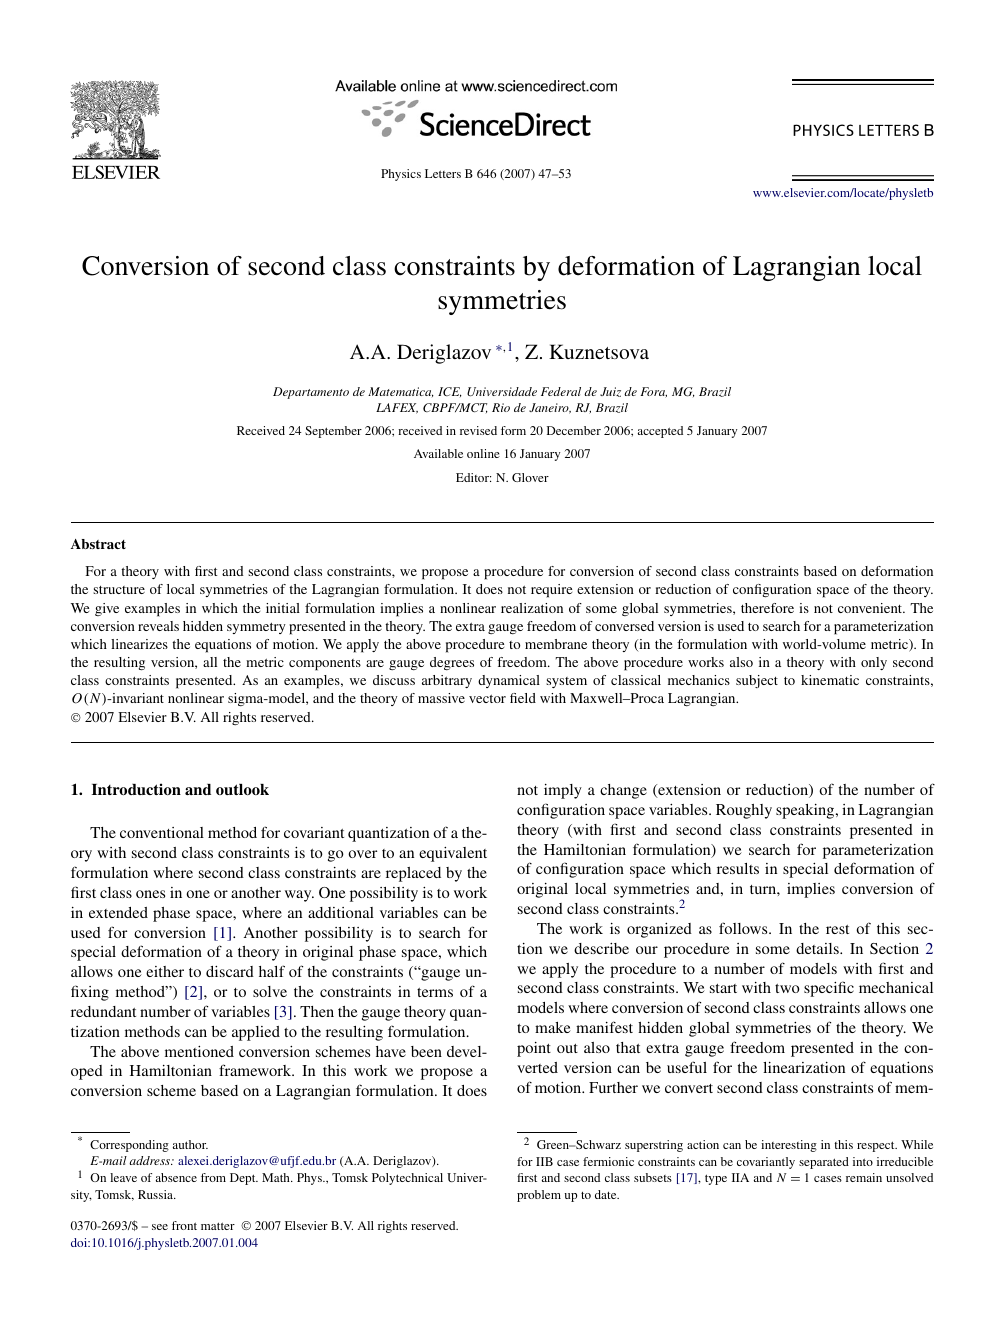 Conversion Of Second Class Constraints By Deformation Of Lagrangian Local Symmetries Topic Of Research Paper In Physical Sciences Download Scholarly Article Pdf And Read For Free On Cyberleninka Open Science Hub